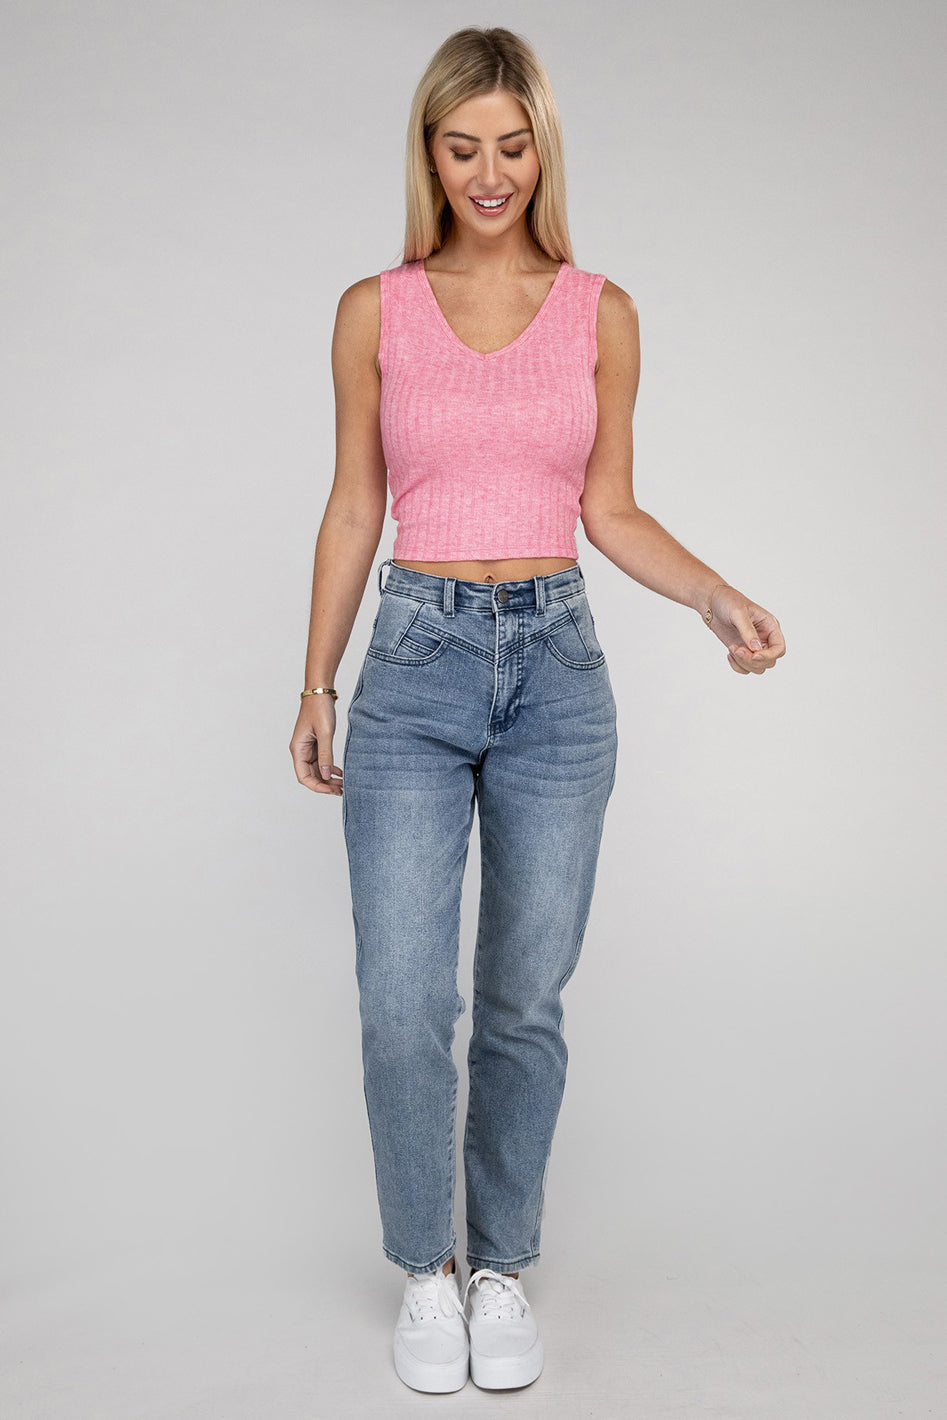 Ribbed Scoop Neck Cropped Sleeveless Top - Azoroh